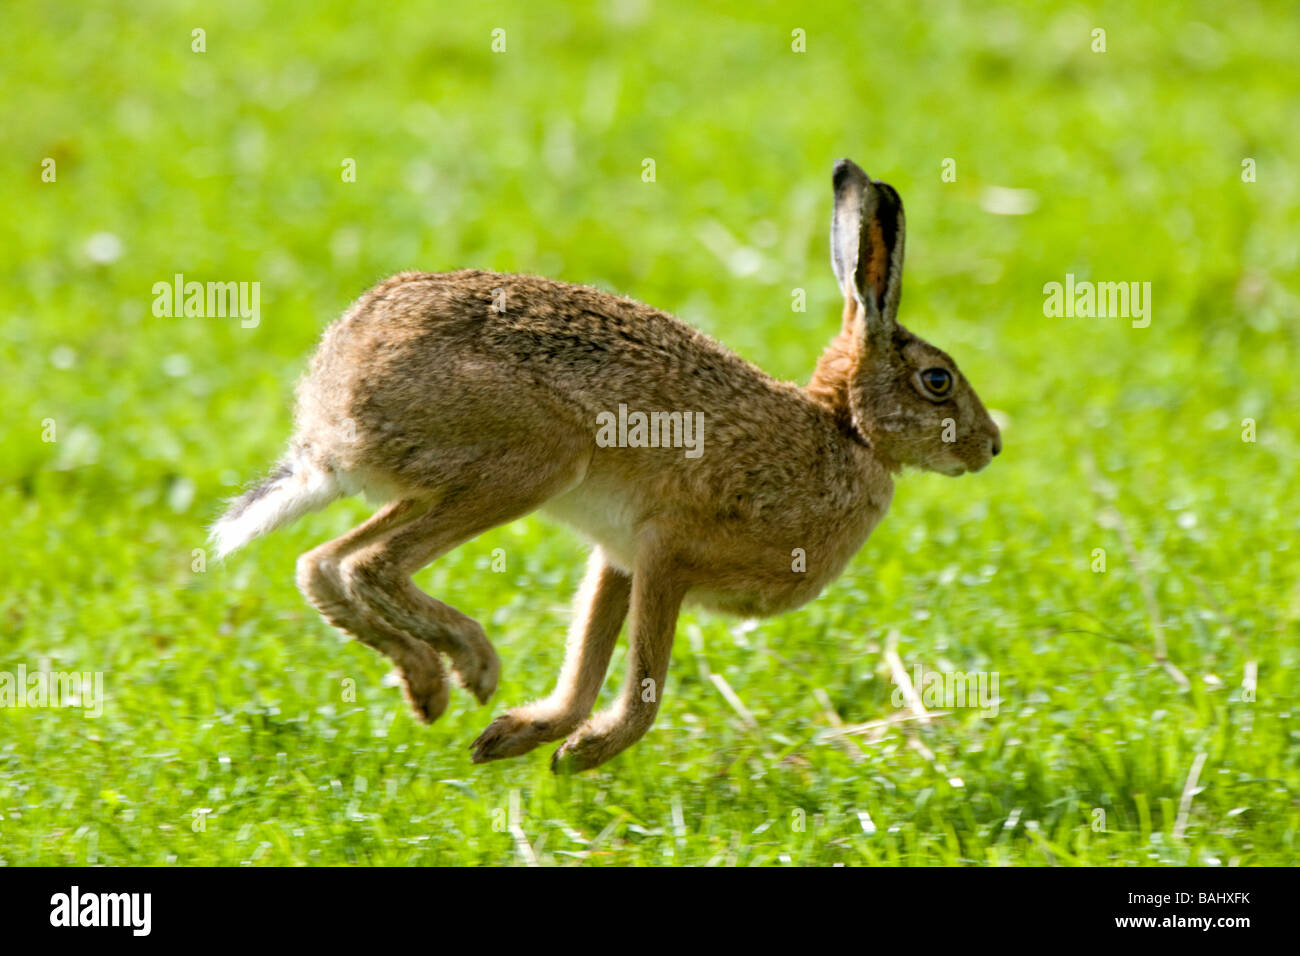 Hare hopping in the grass Stock Photo